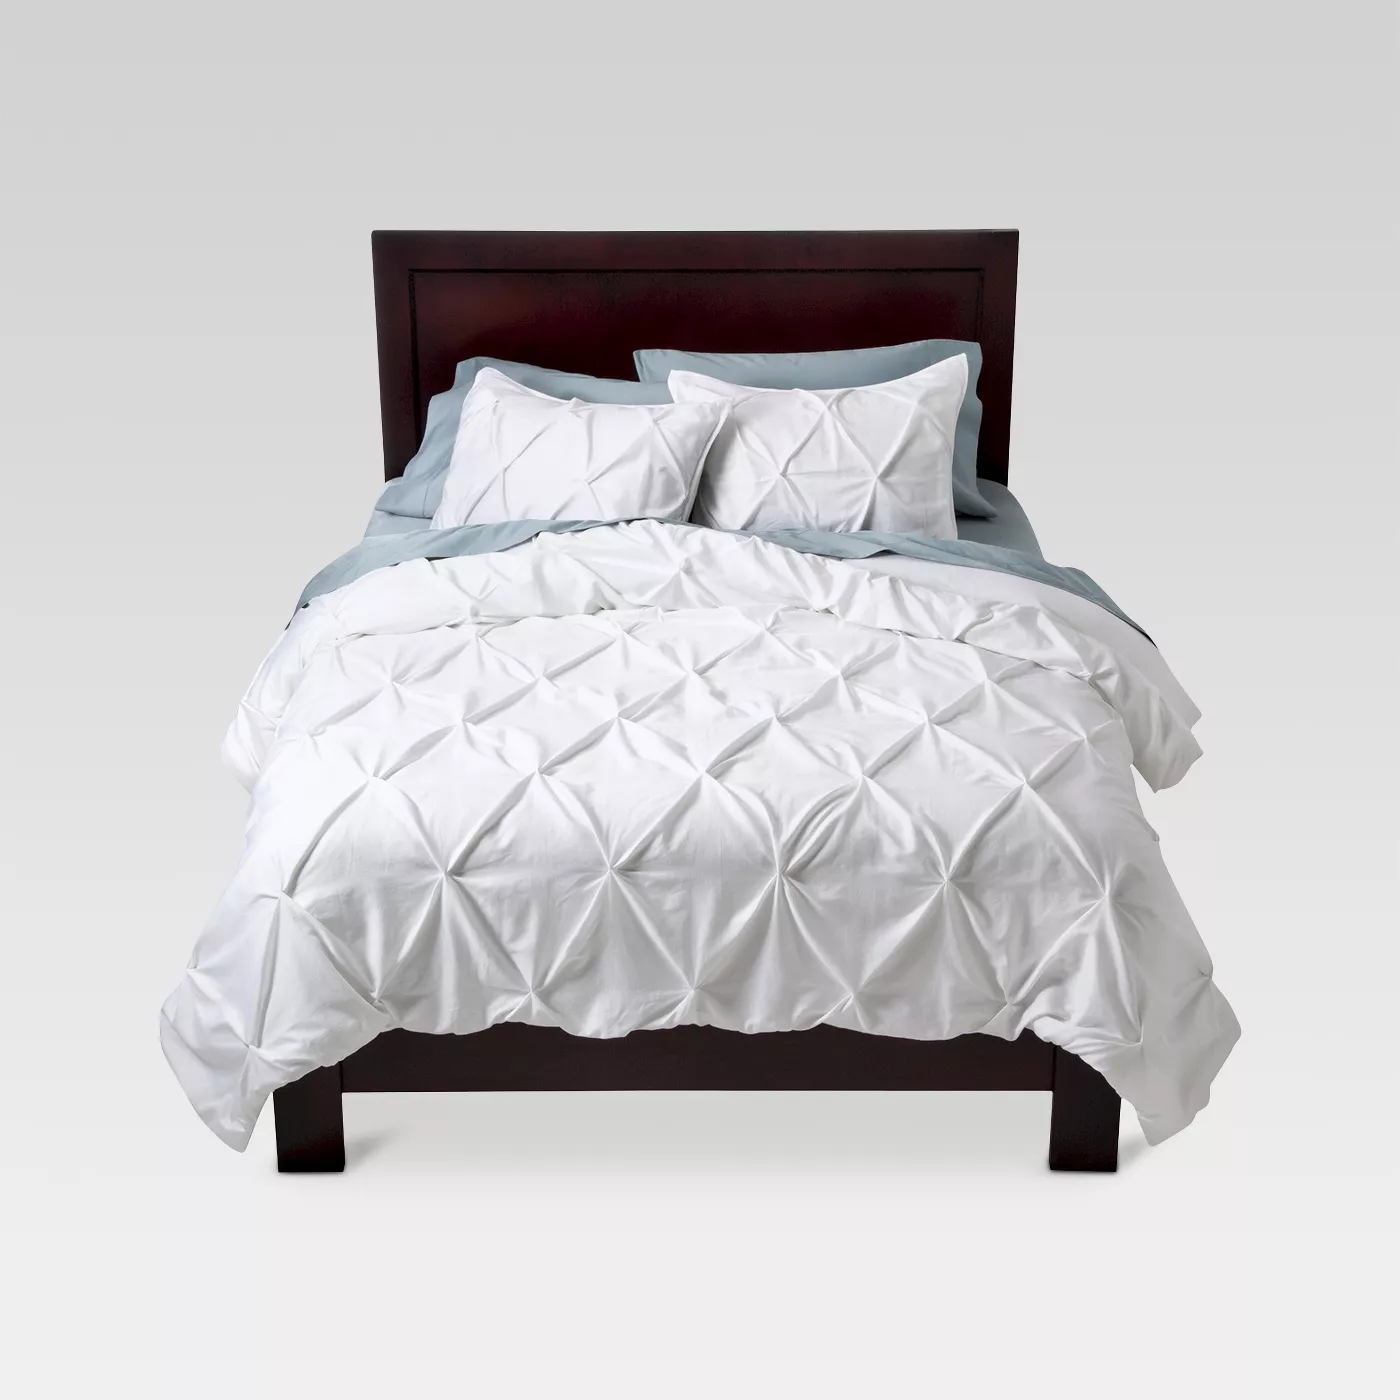 White Pinched Pleat Comforter Set (Full/Queen) 3pc - Thresholdâ¢ - image 1 of 9